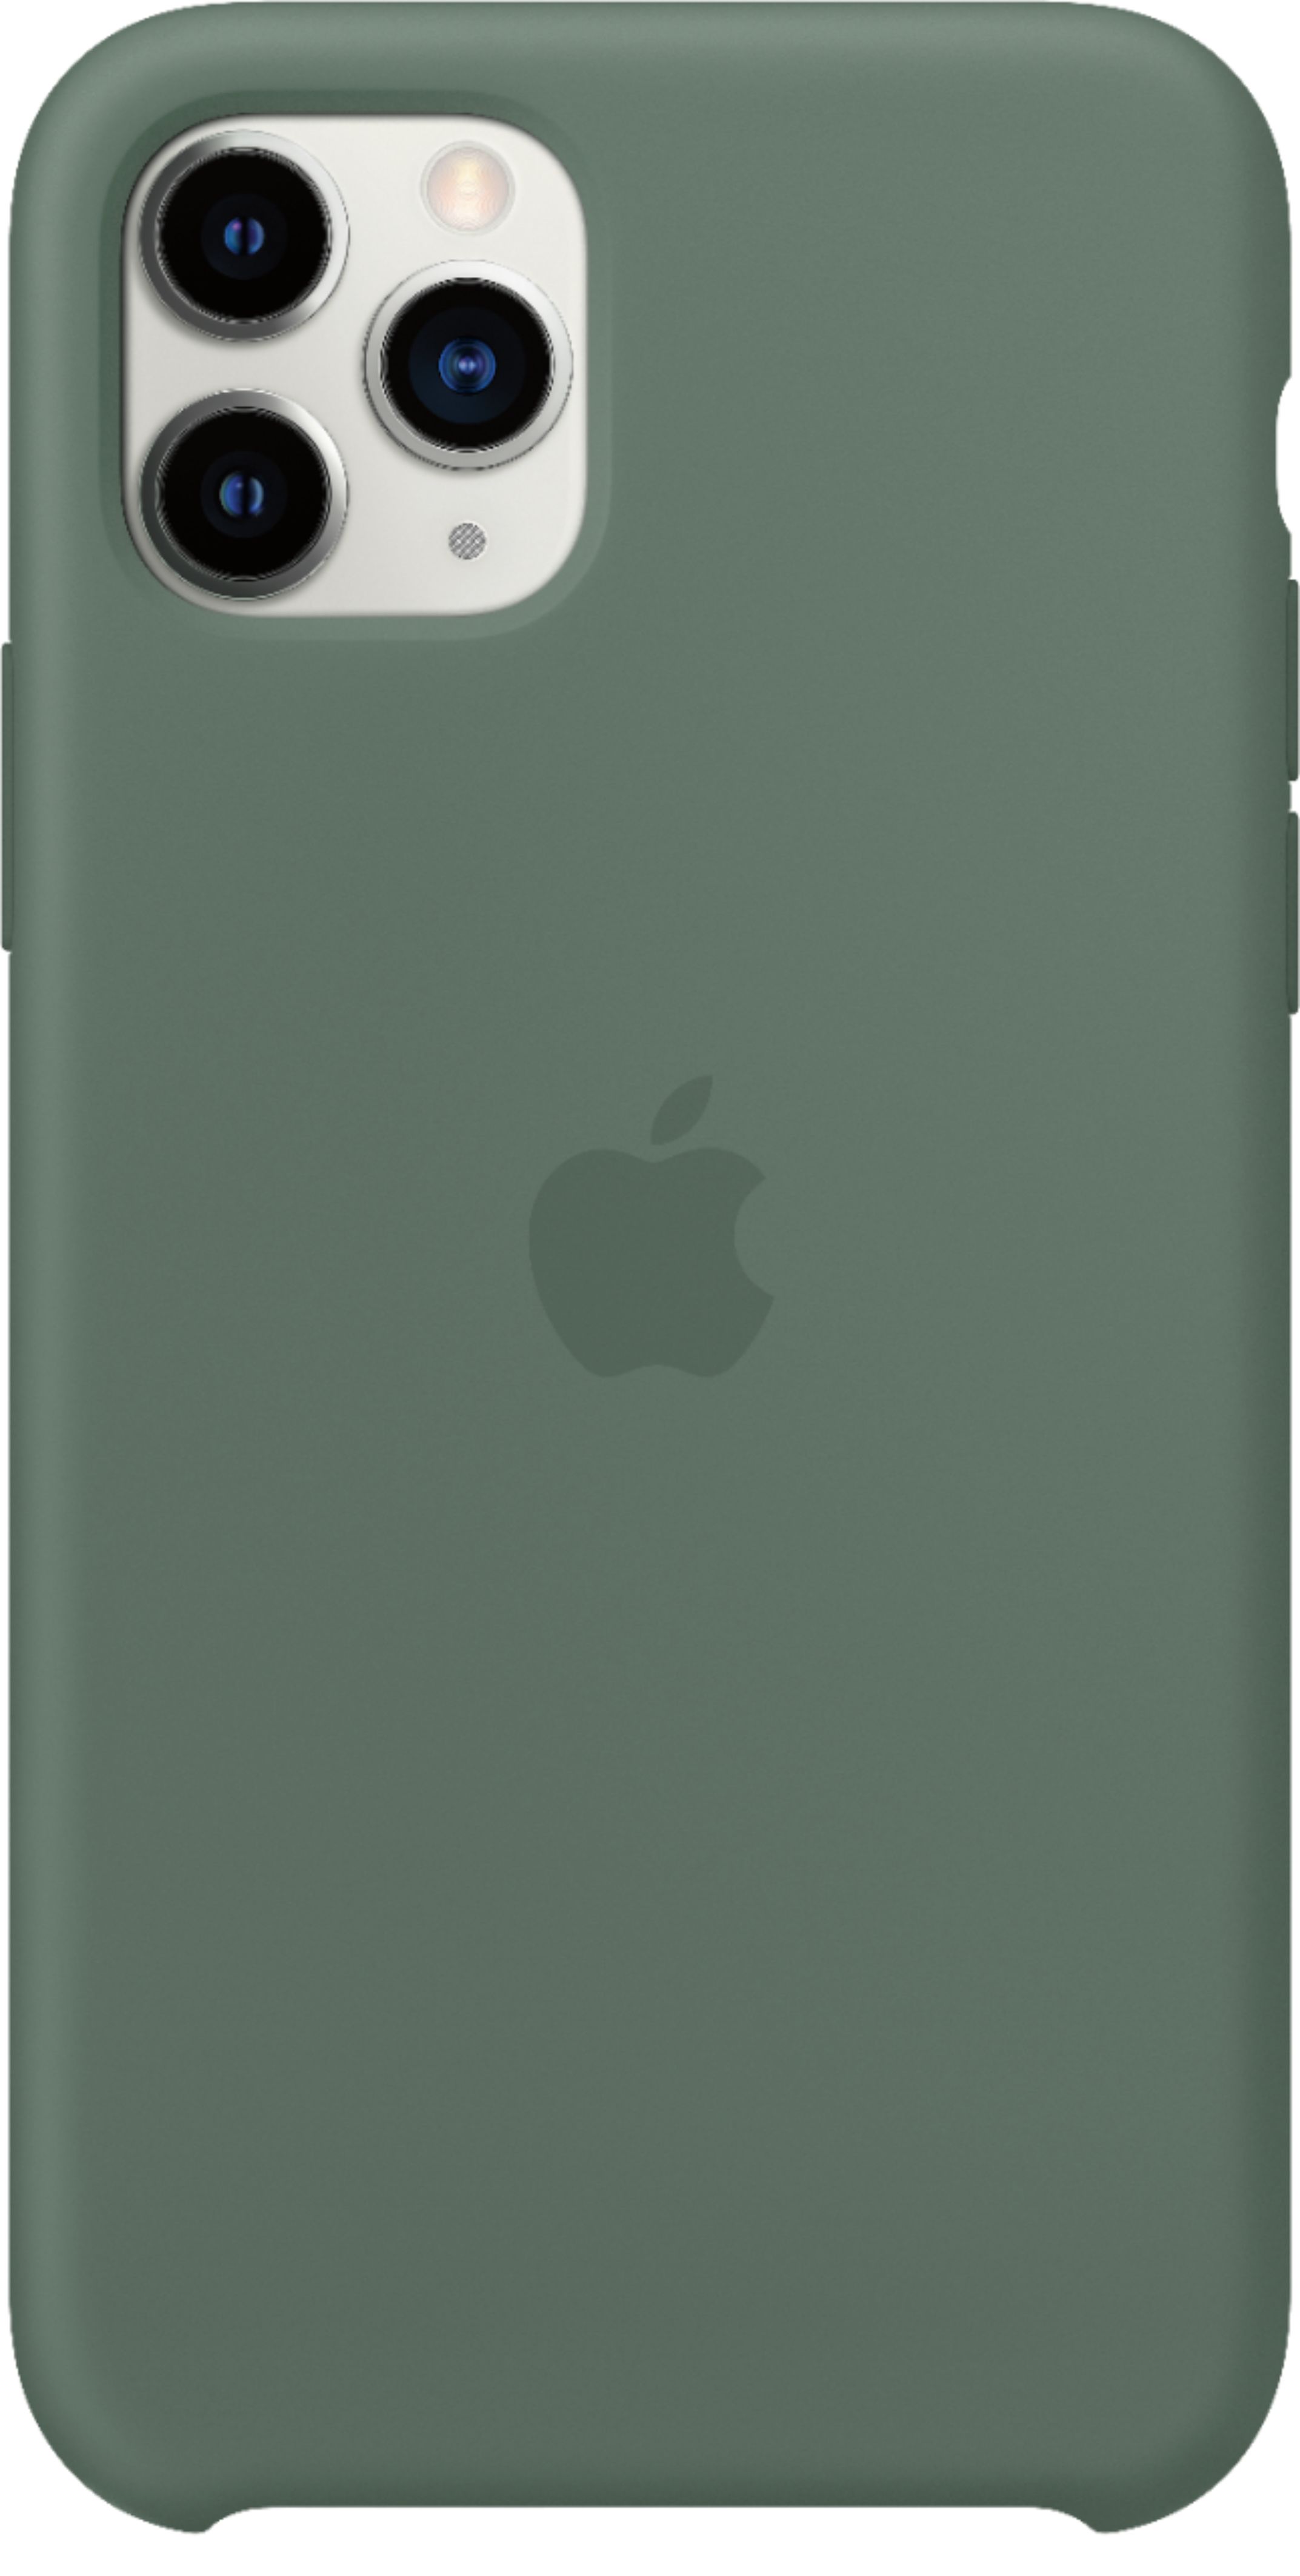 Apple Iphone 11 Pro Silicone Case Pine Green Mwyp2zm A Best Buy